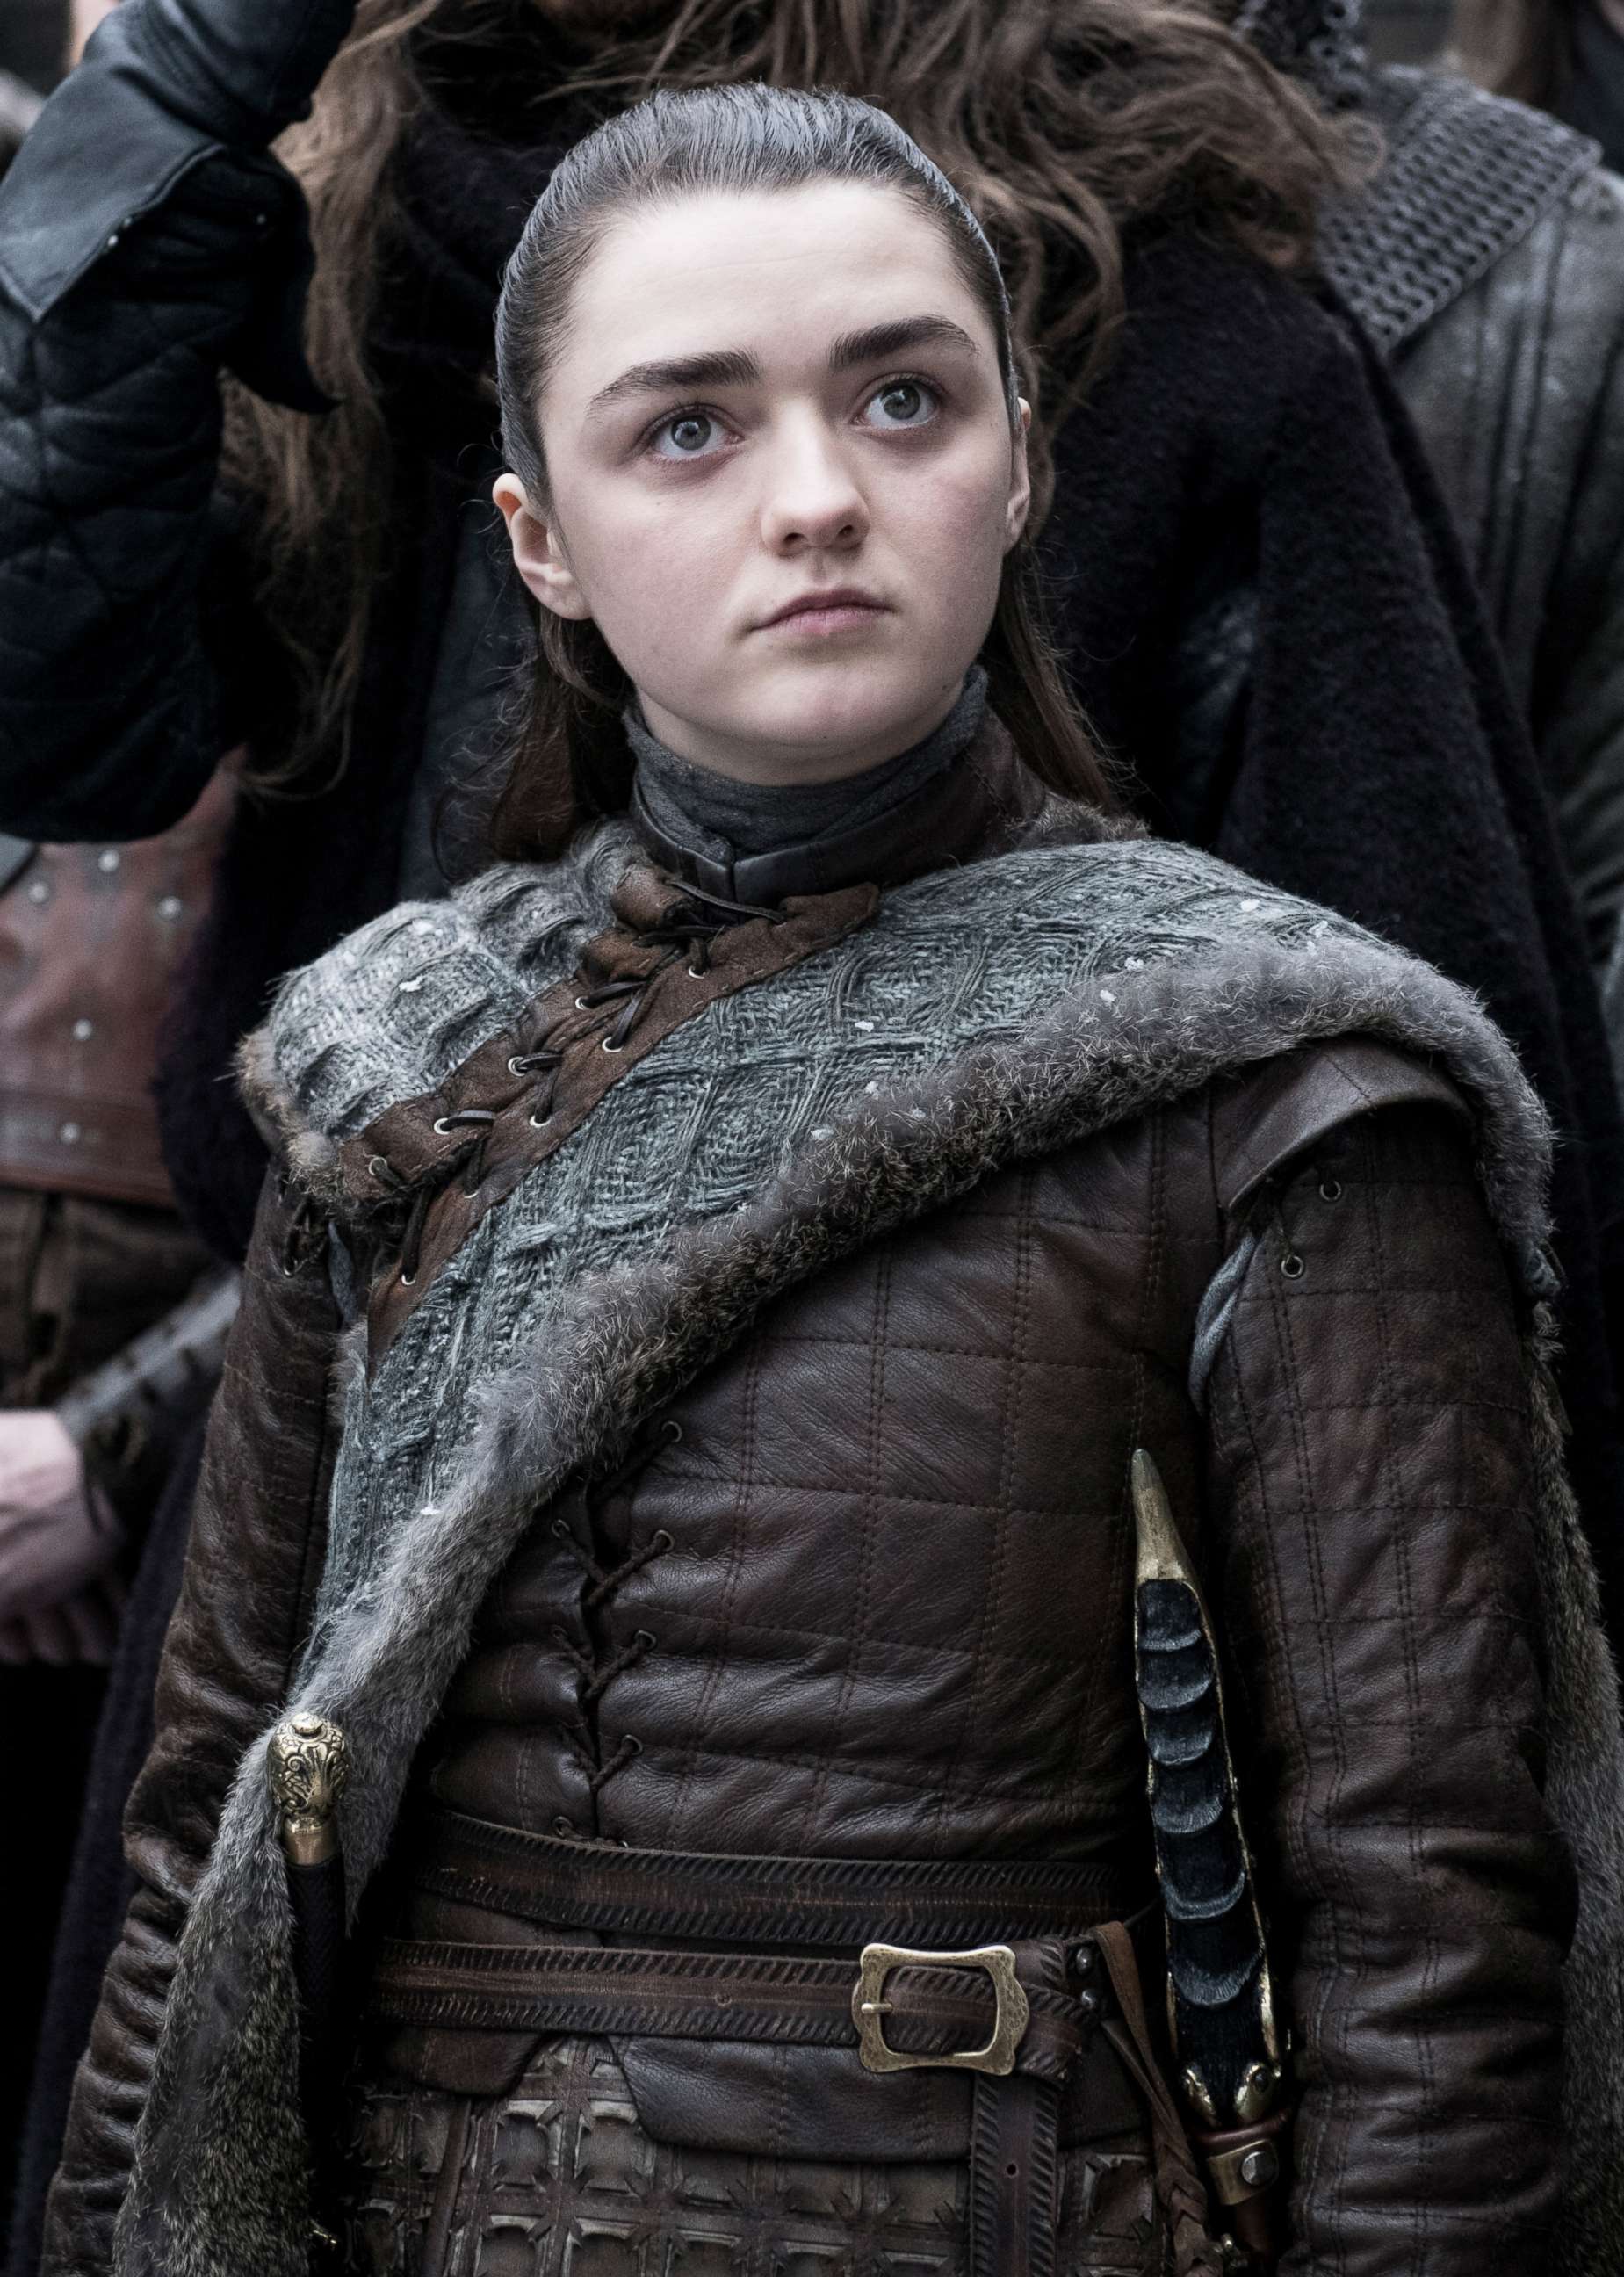 PHOTO: Maisie Williams appears in the eighth season of "Game of Thrones."